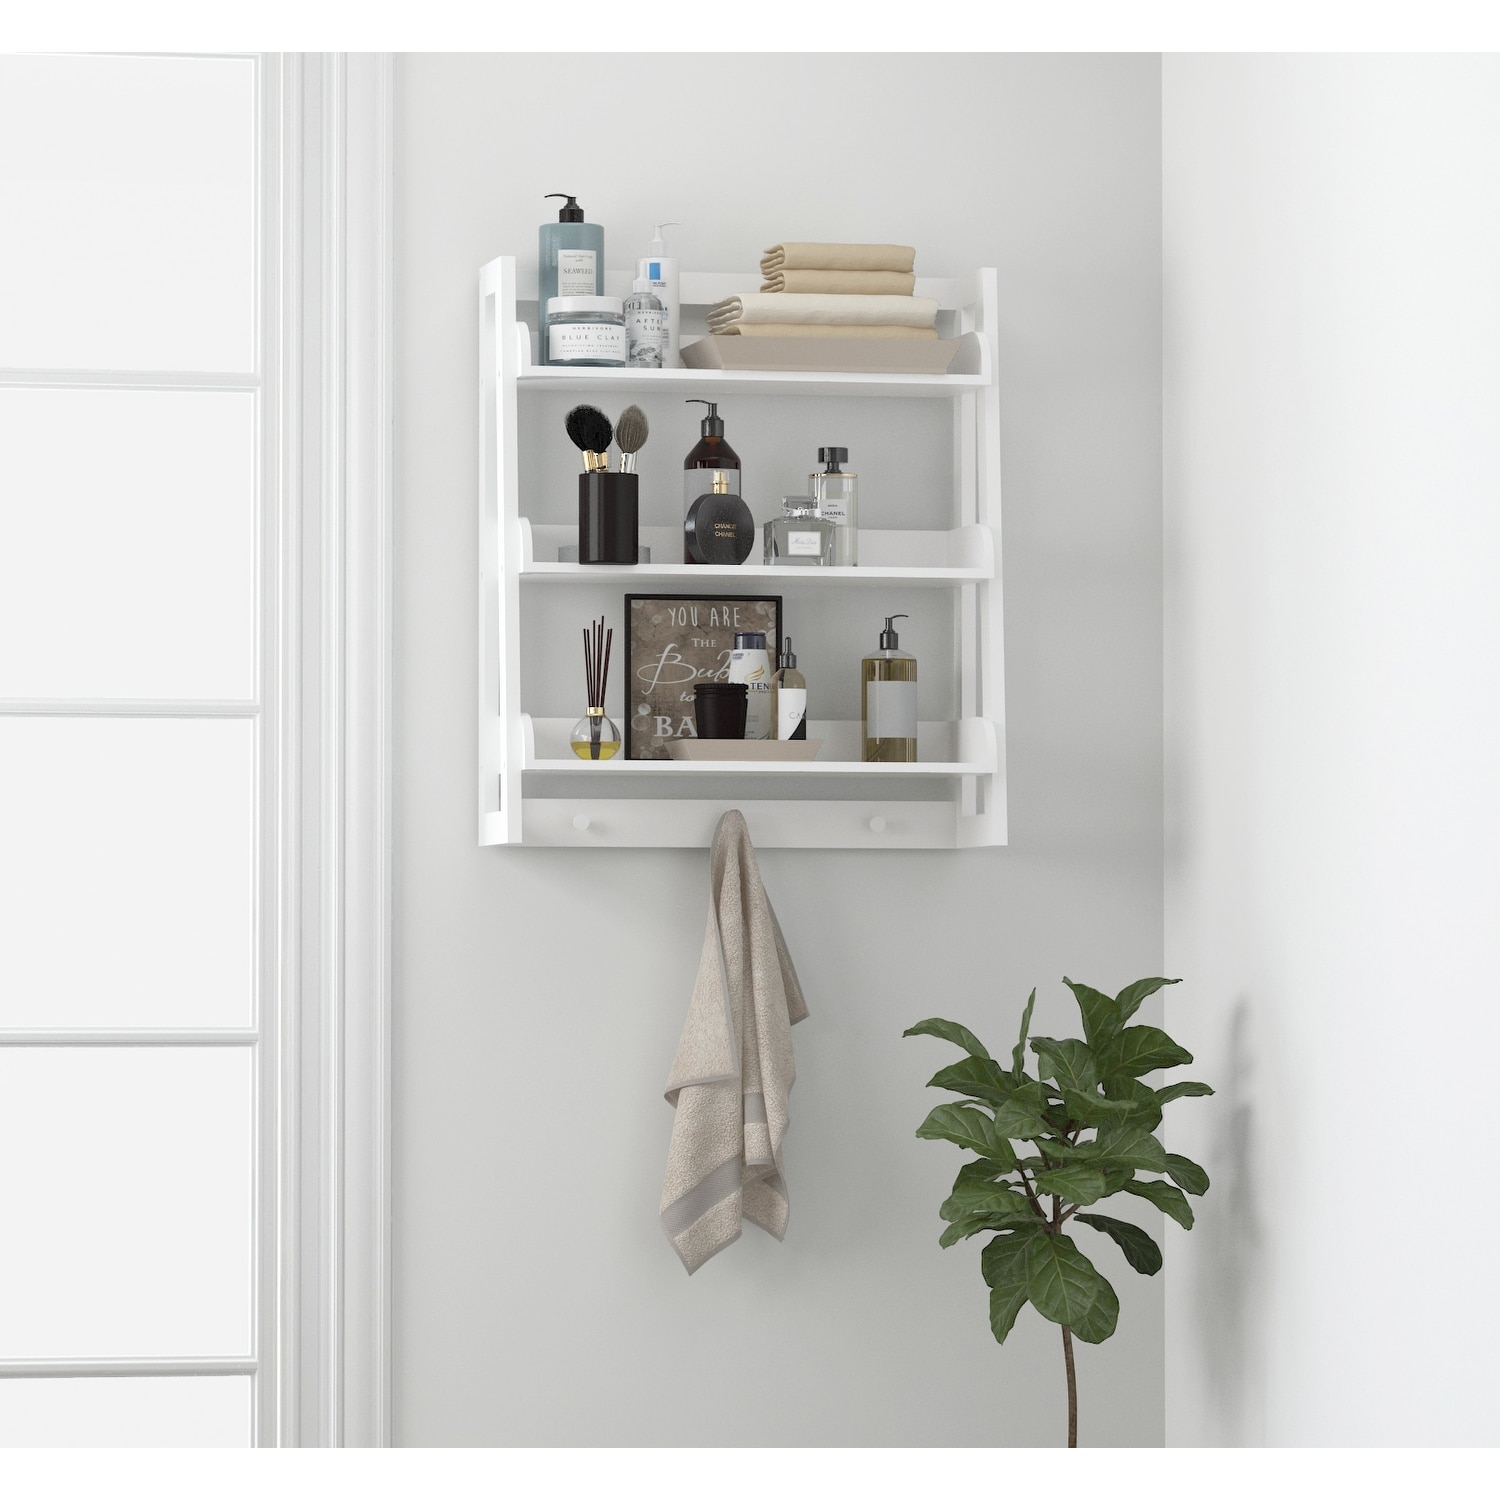 https://ak1.ostkcdn.com/images/products/is/images/direct/cf8f43d29db41b38b6df661fb5ad9f28db6e6880/UTEX-3-Tier-Bathroom-Shelf-Wall-Mounted-with-Towel-Hooks%2C-Bathroom-Organizer-Shelf-Over-The-Toilet.jpg